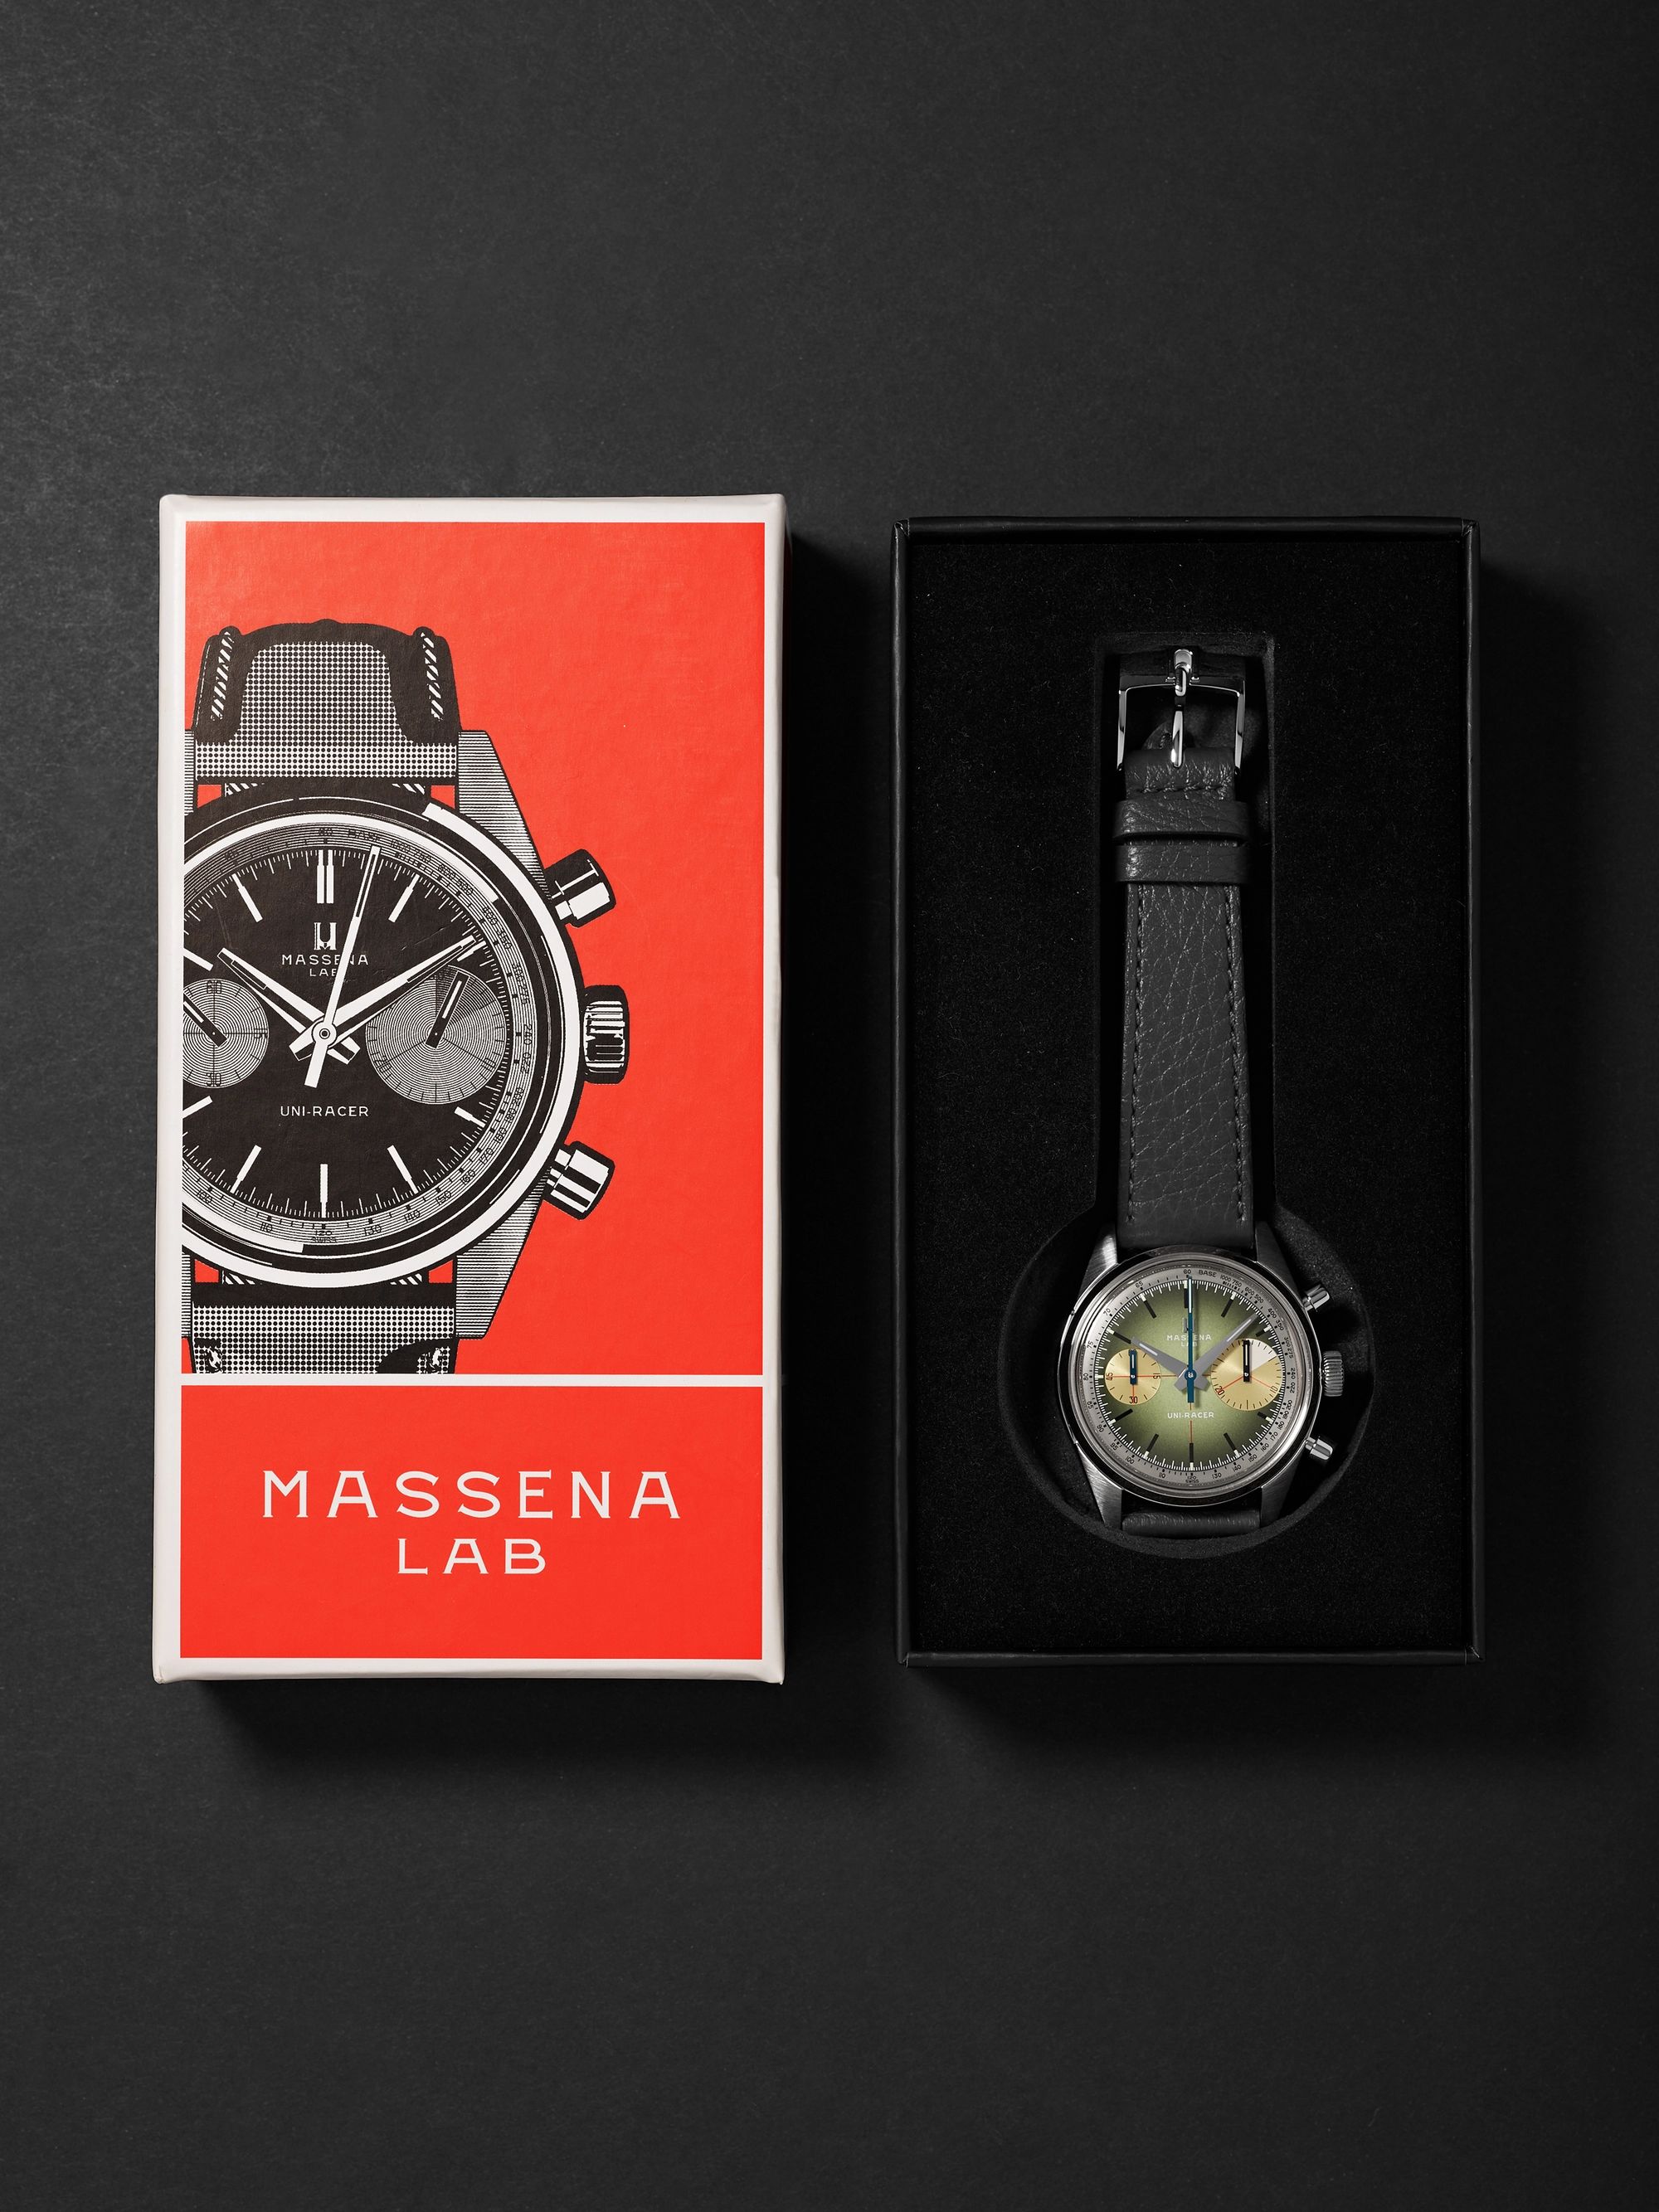 MASSENA LAB Uni-Racer Limited Edition Hand-Wound Chronograph 39mm Stainless Steel and Full-Grain Leather Watch, Ref. No. UR-004-SAF